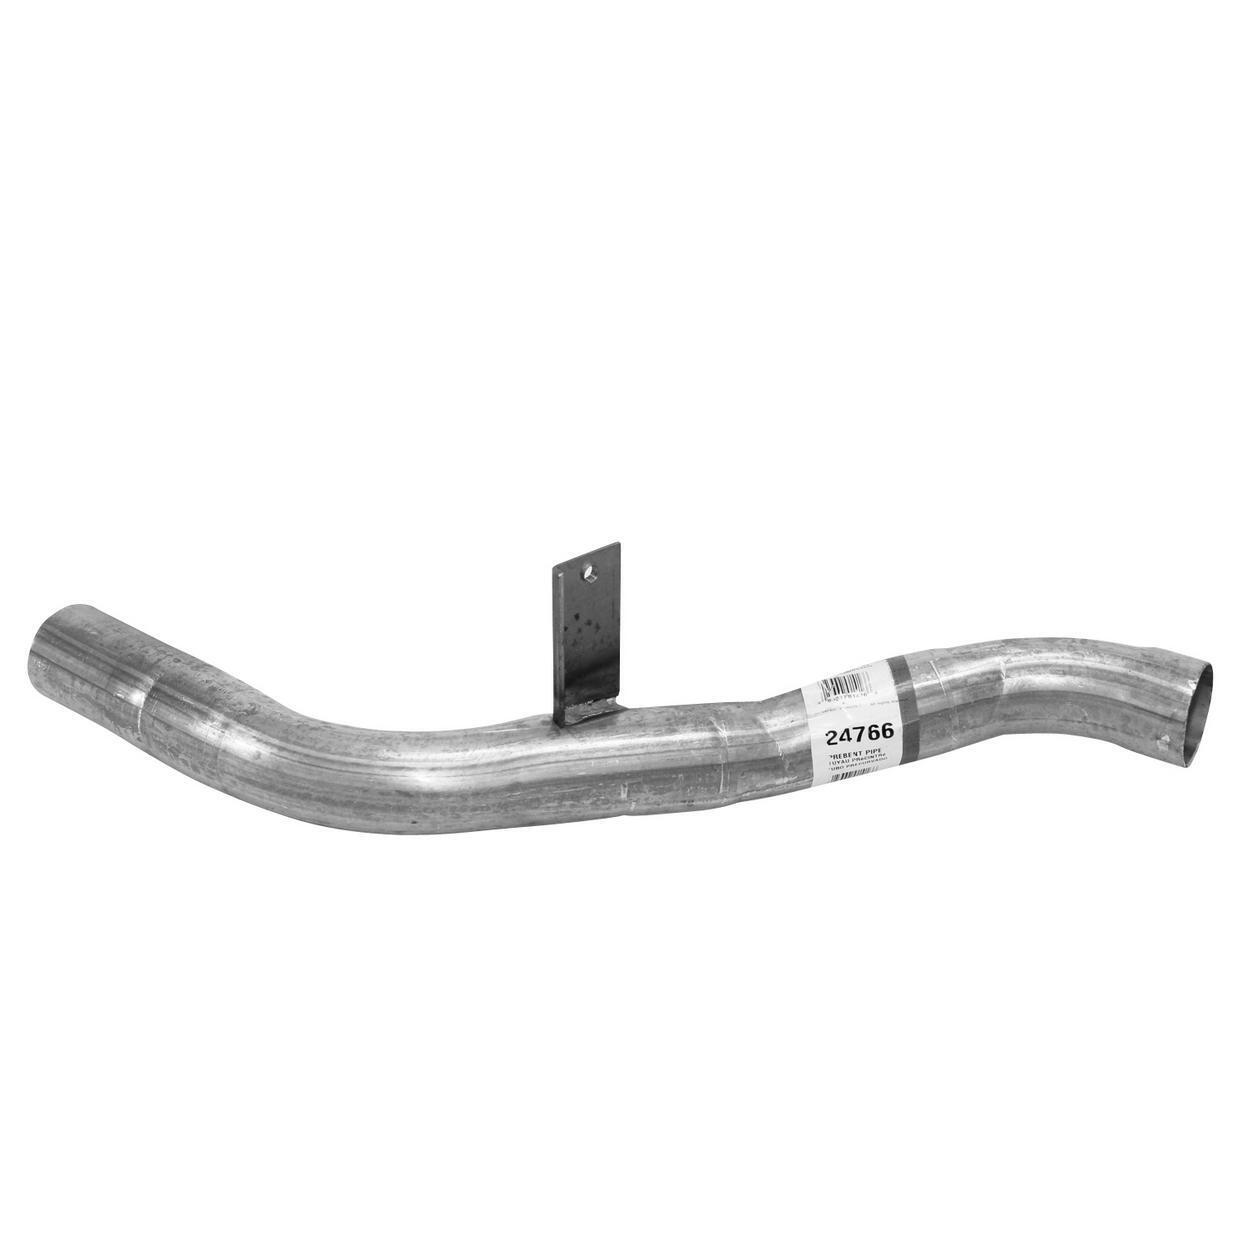 Exhaust Tail Pipe for 1994-1996 Oldsmobile Cutlass Ciera 3.1L V6 GAS OHV